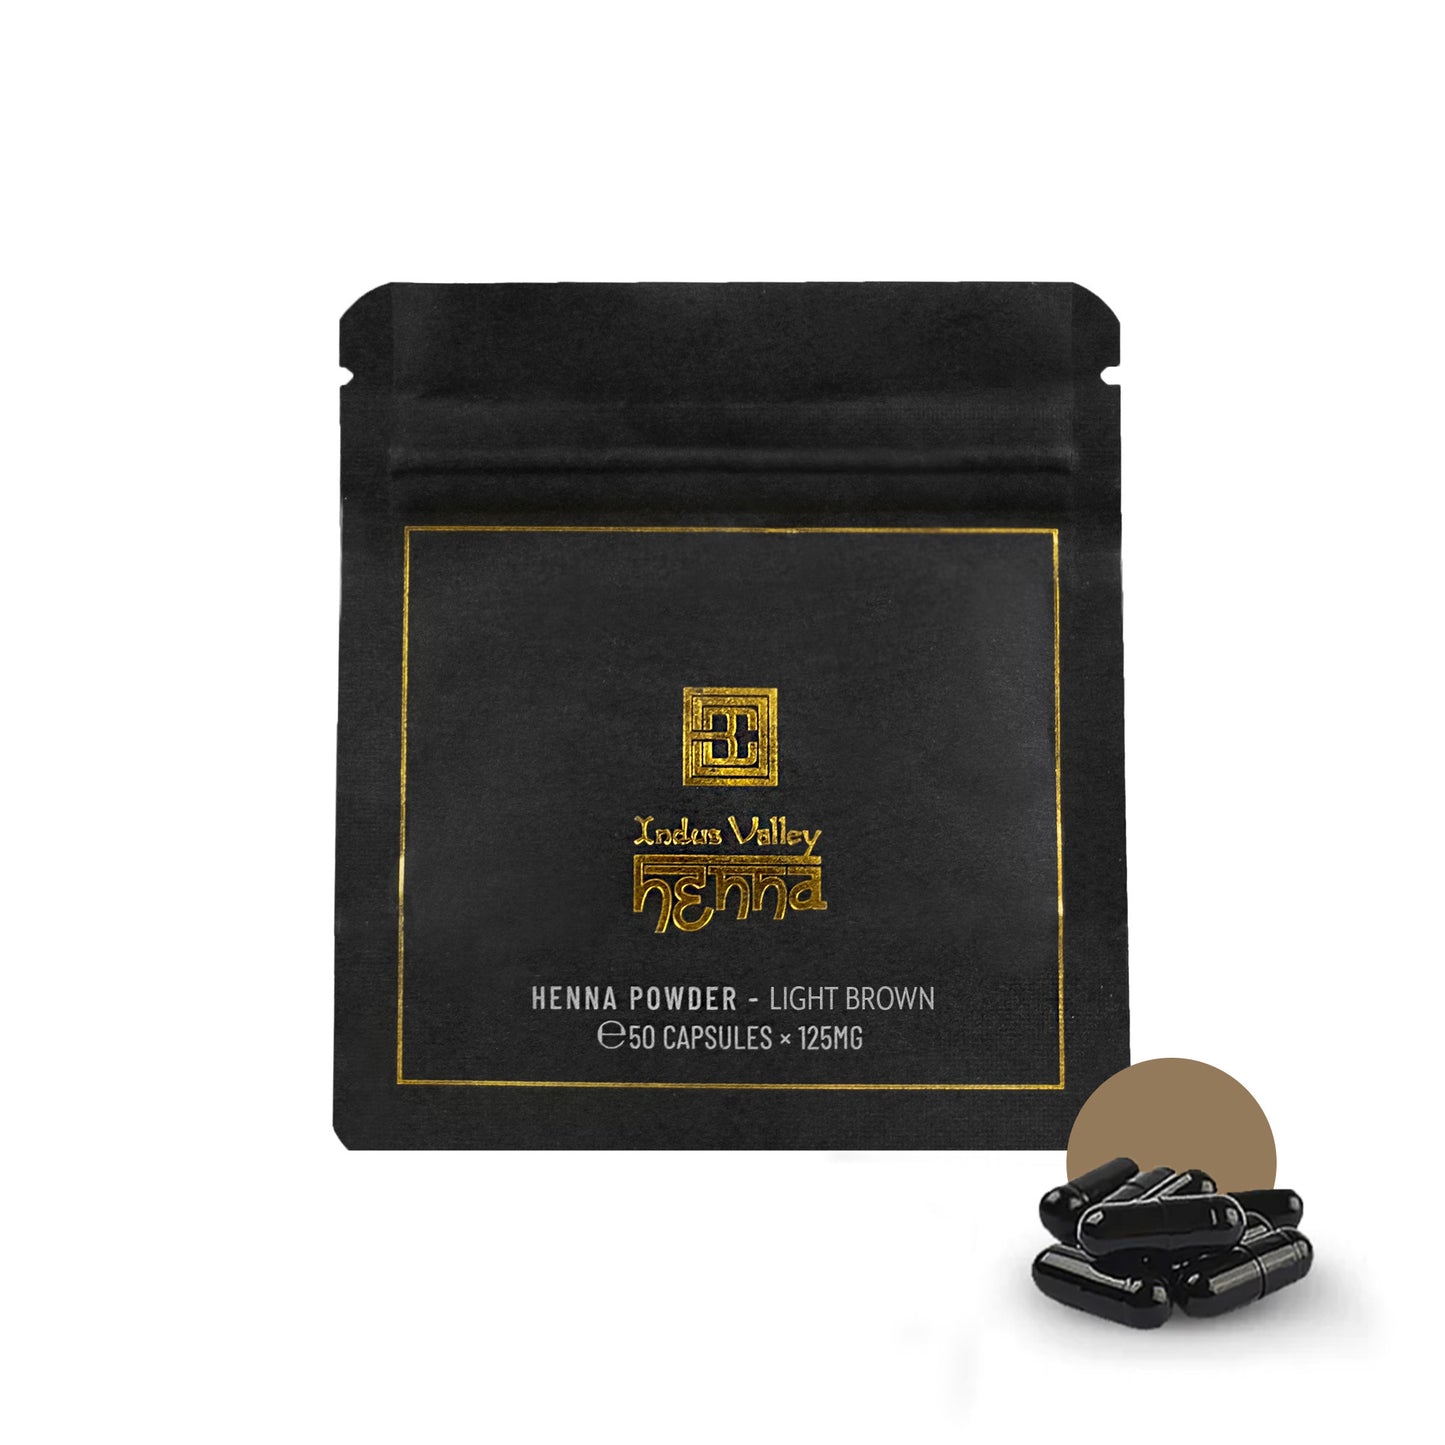 Brow Henna Powder capsules Color-Light-Brown alongside packaging against a white background